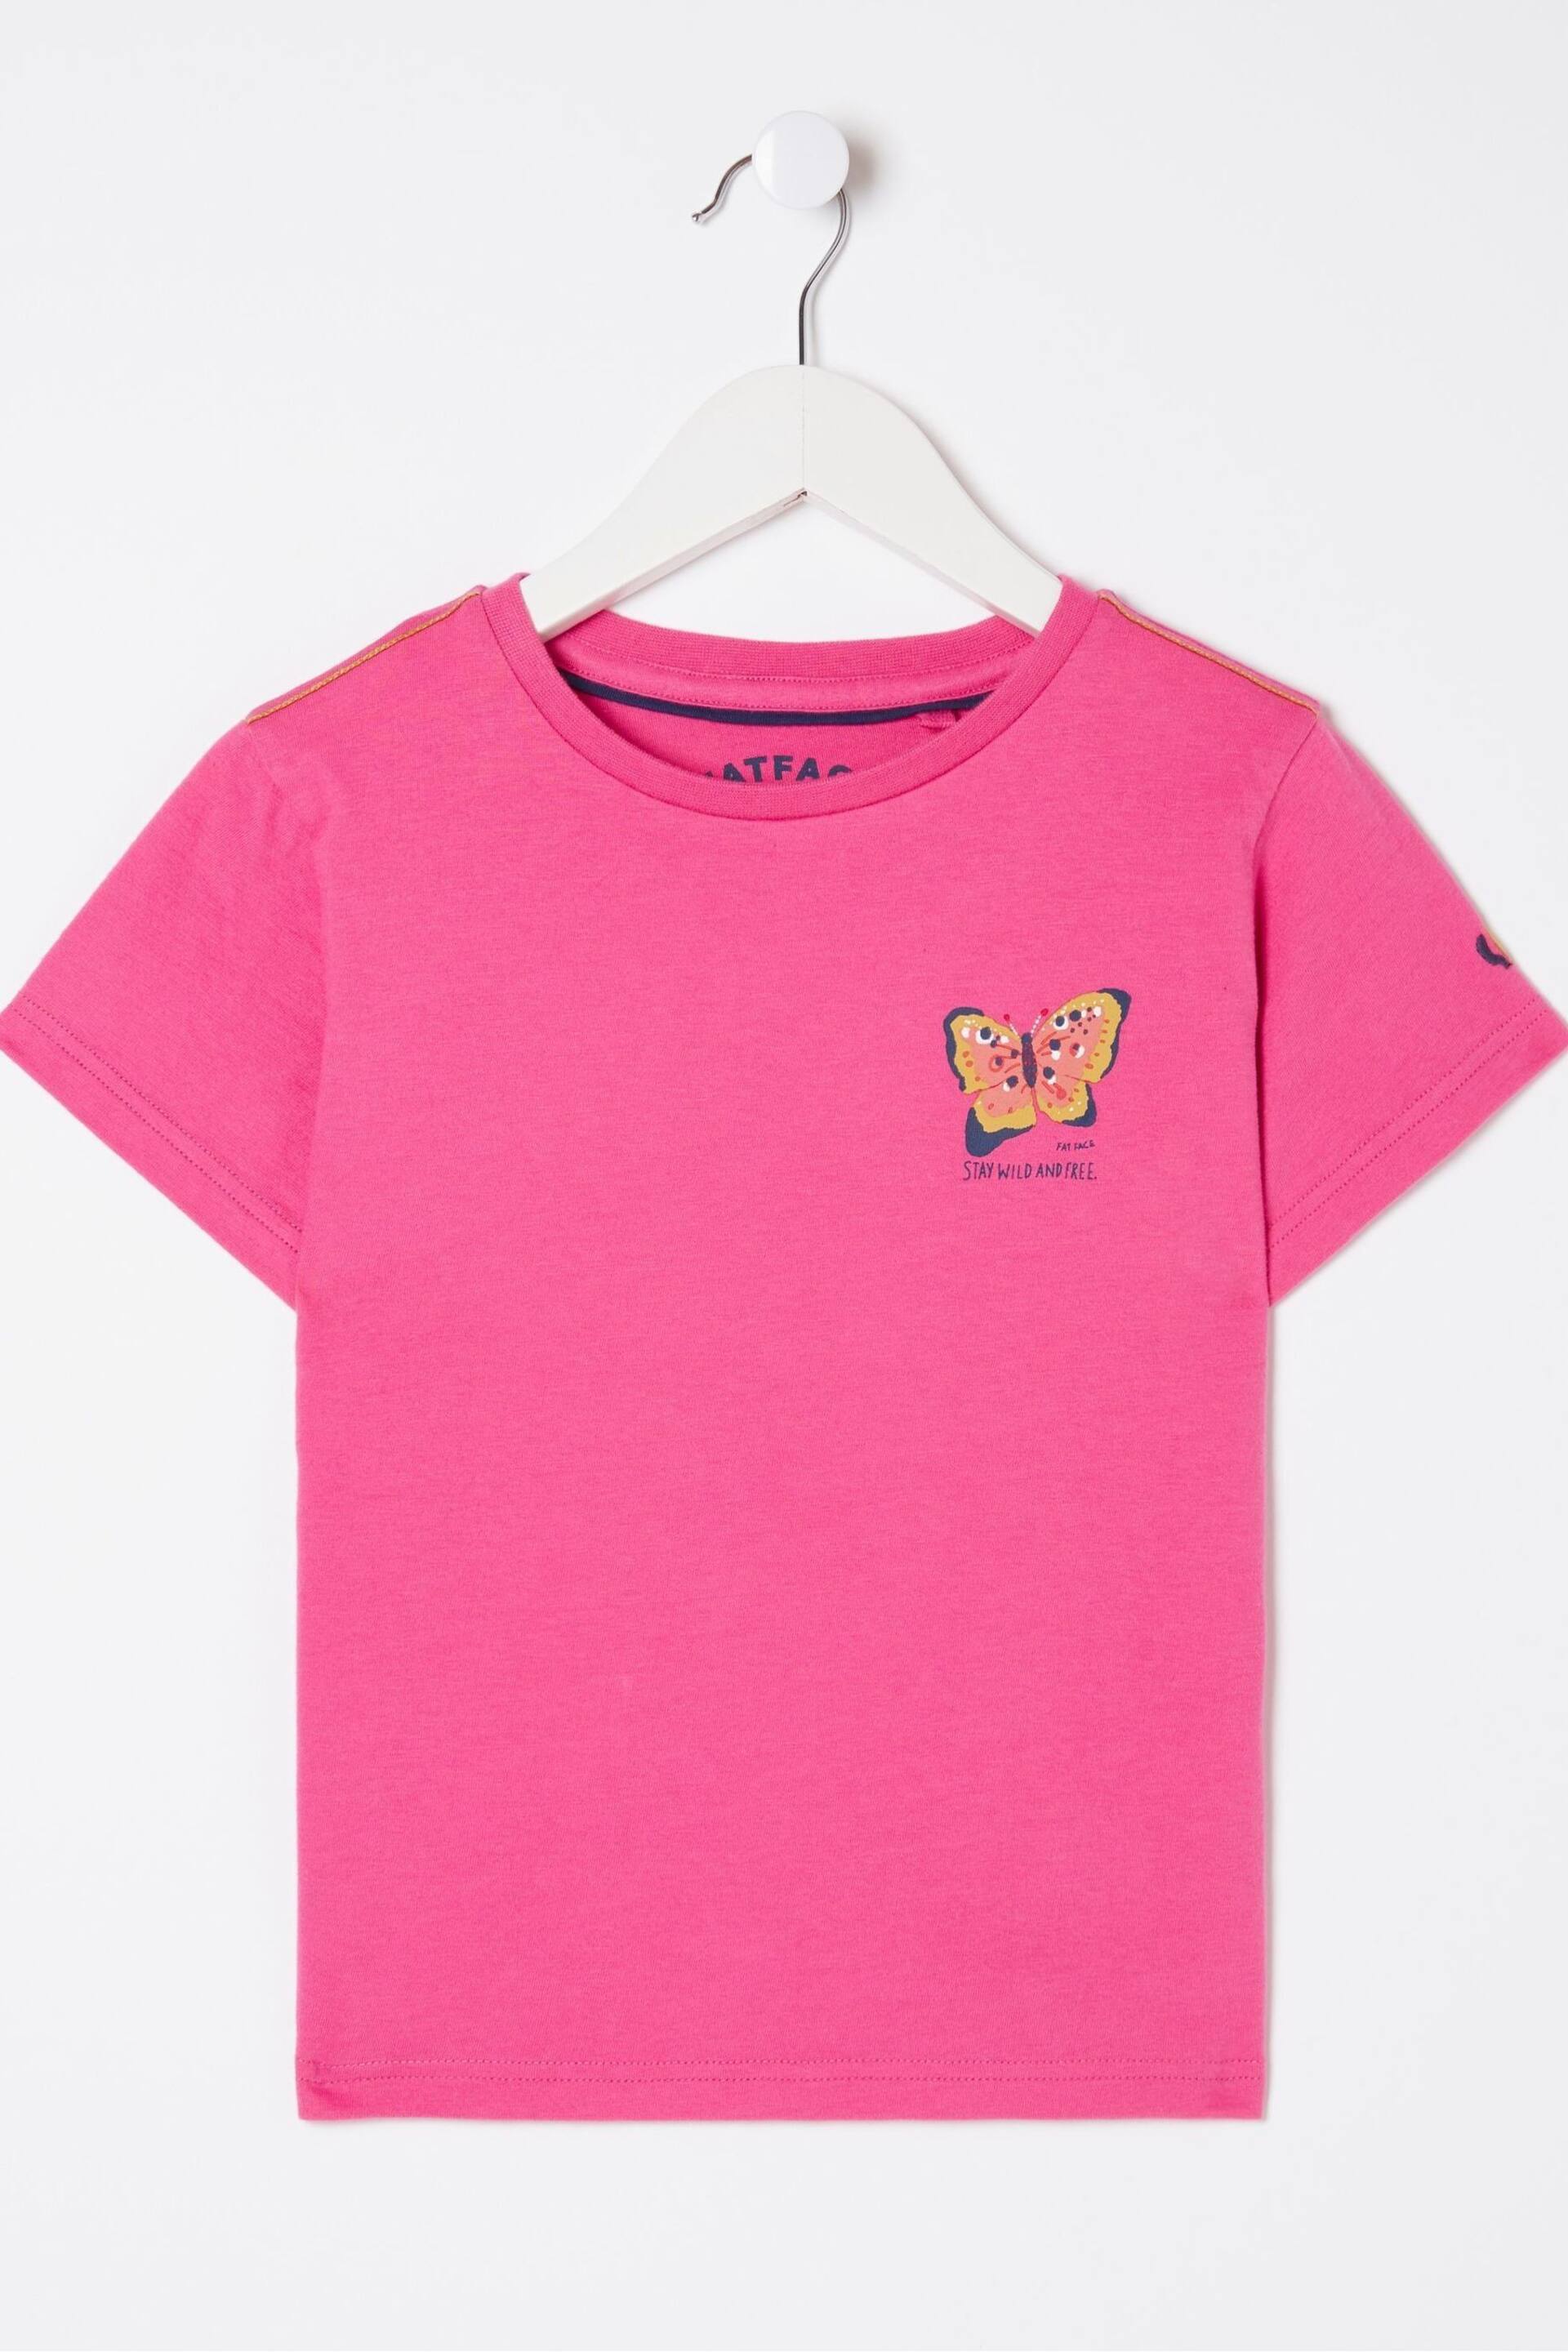 FatFace Pink Butterfly Fact T-Shirt - Image 1 of 6